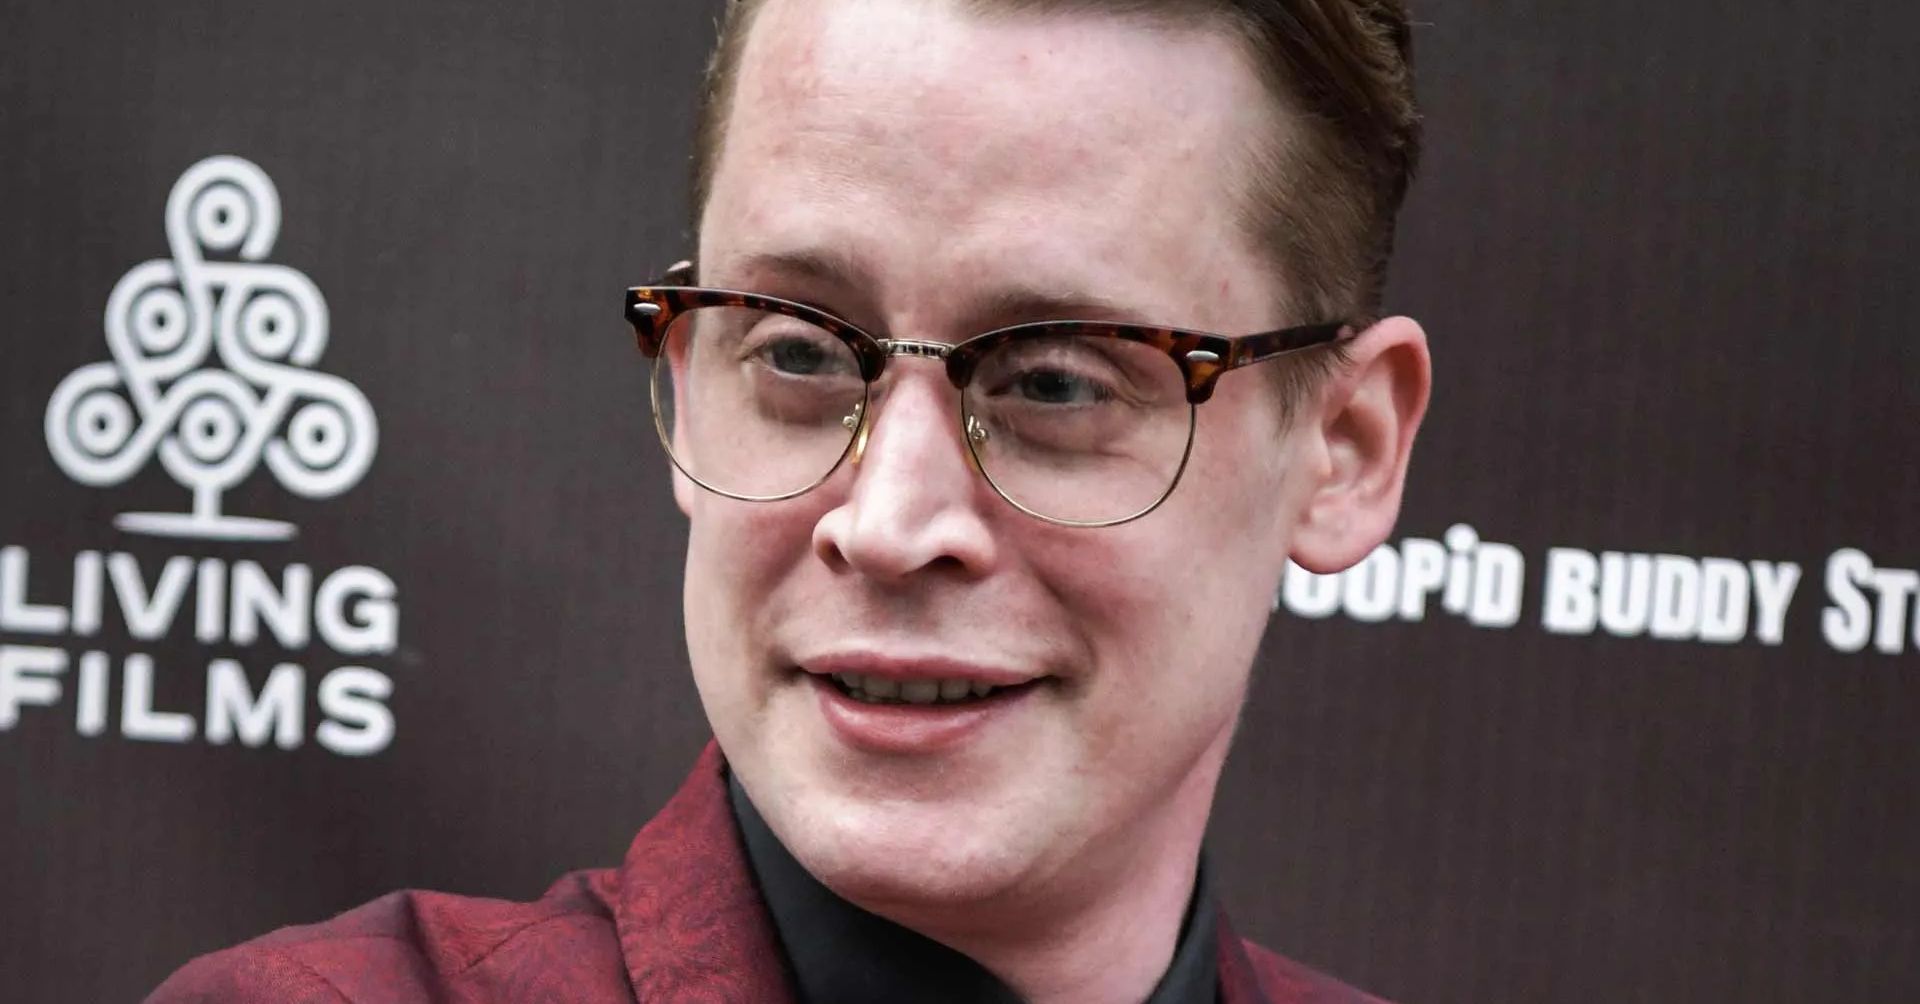 Macaulay Culkin Wants Disney to Call About 'Home Alone' Reboot1920 x 1004